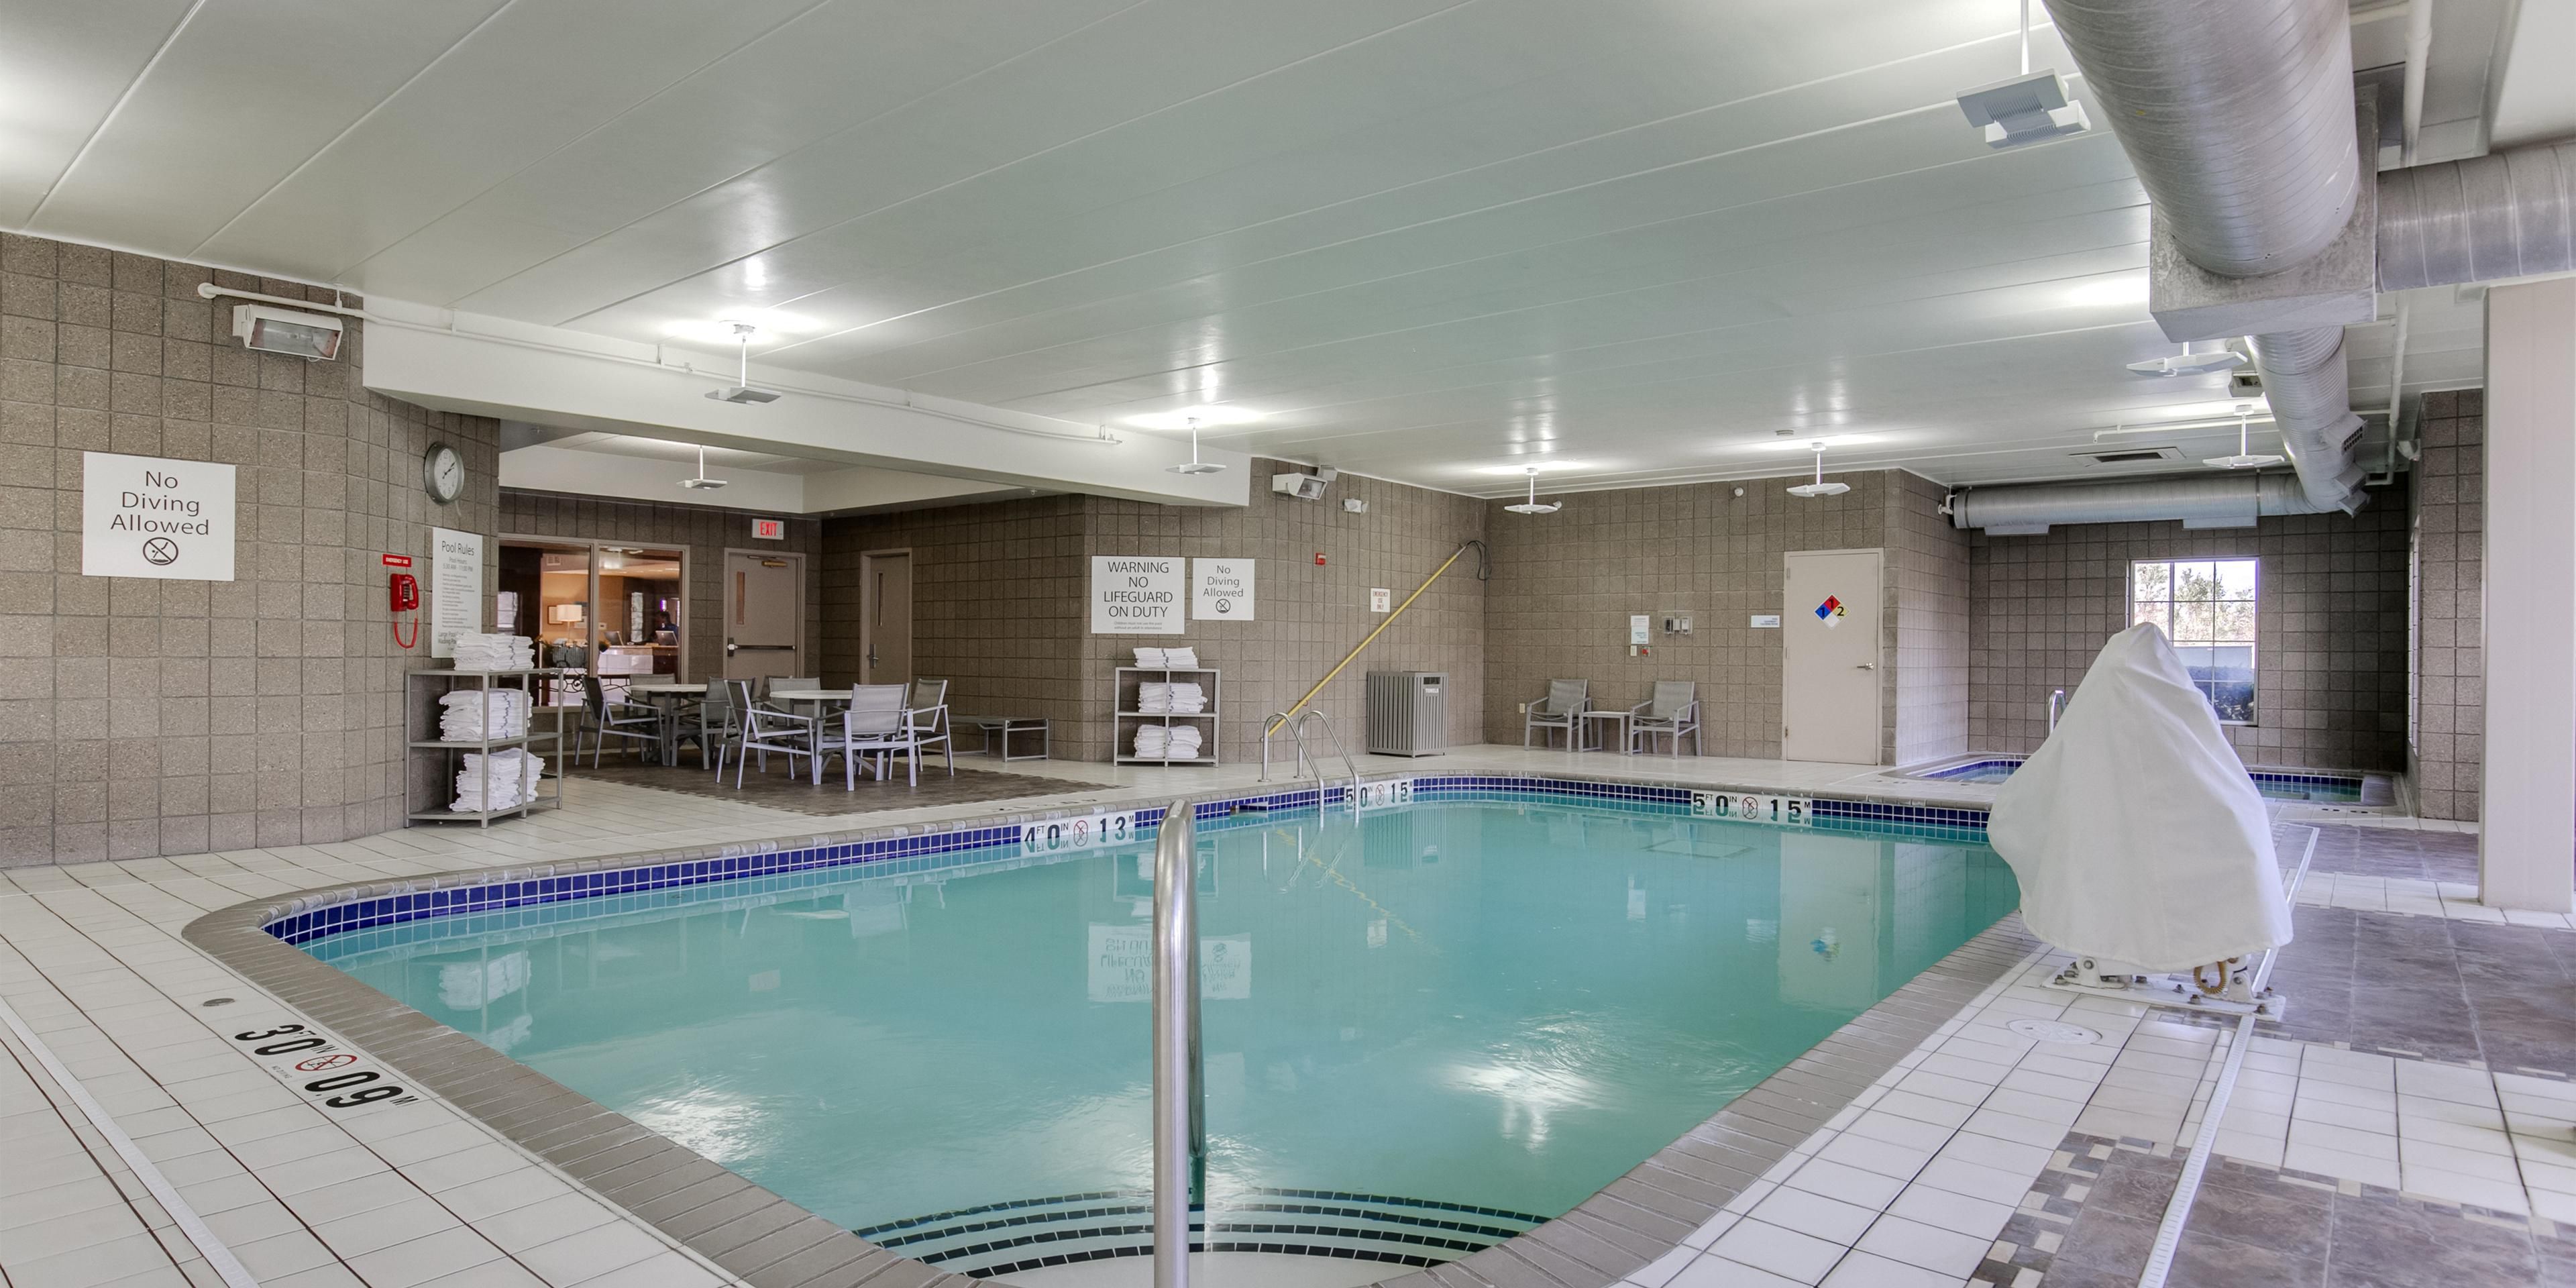 Enjoy our large pool, relax in our hot tub or play with the kids in our wading pool.